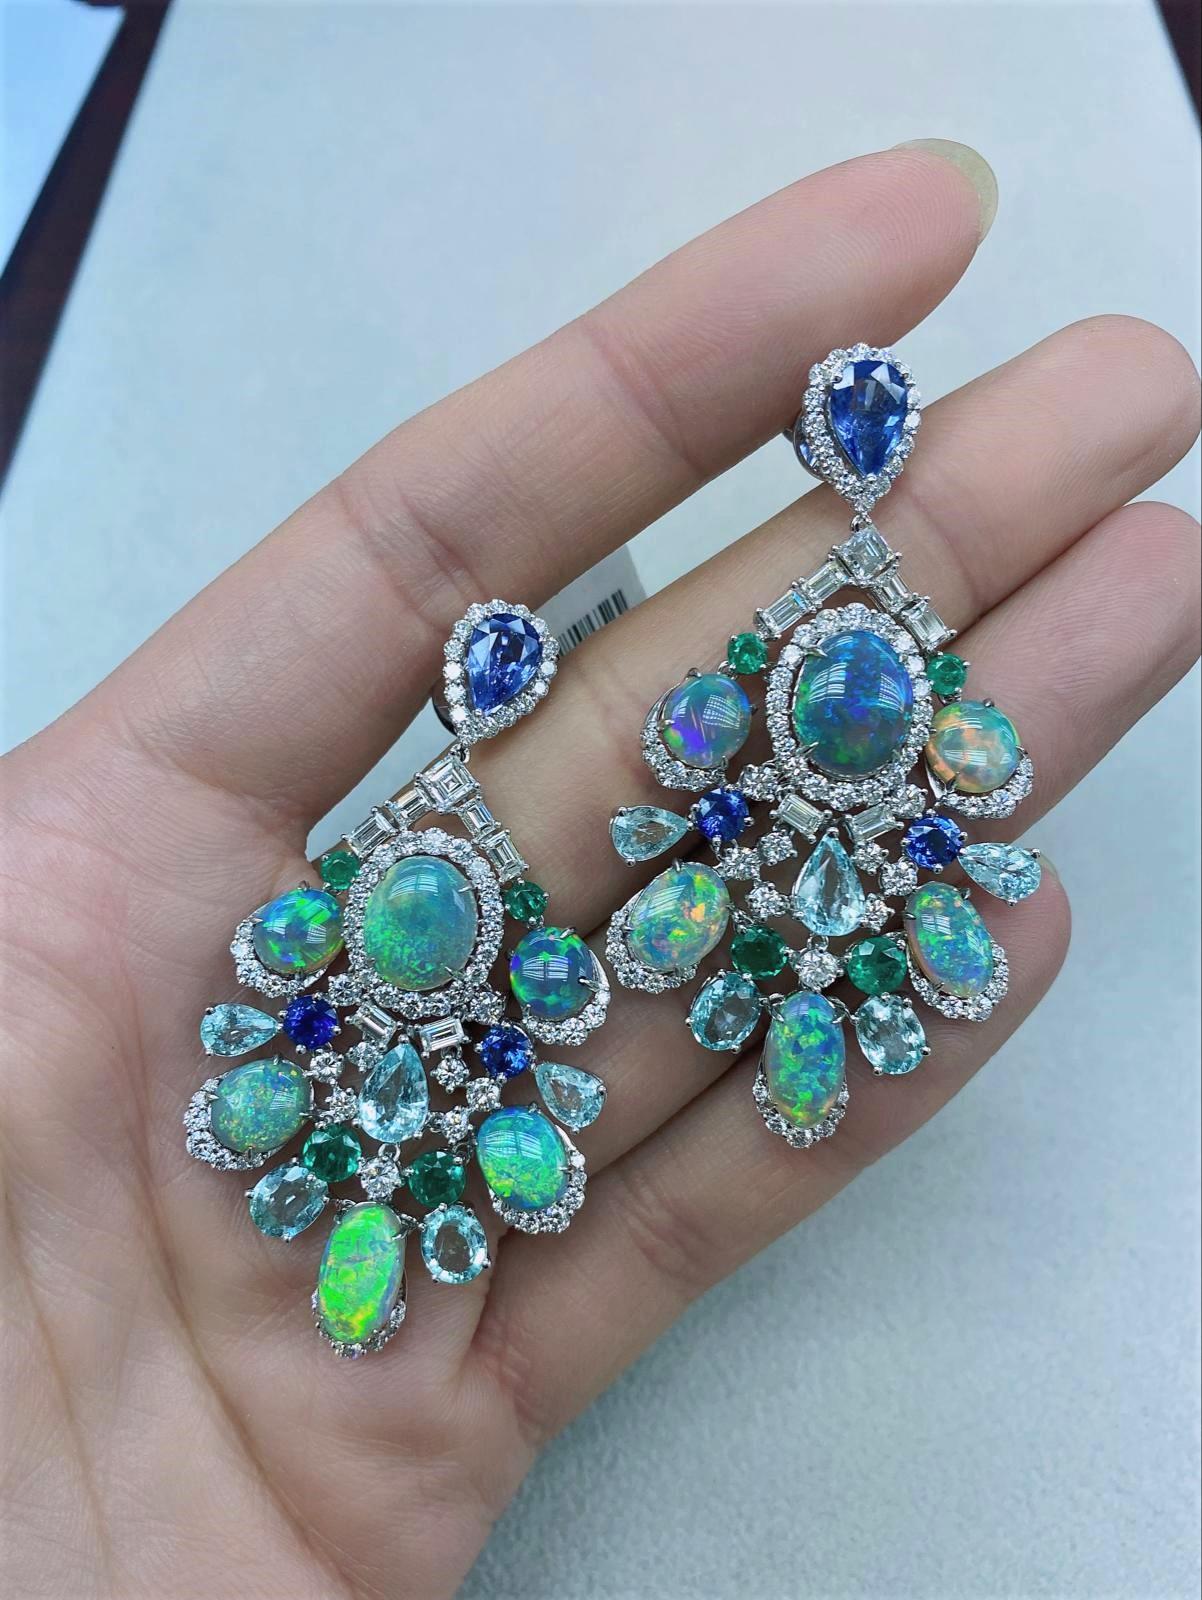 The Following Items we are offering is a Rare Important Spectacular and Brilliant 18KT Gold Large Gorgeous Black Opal, Emerald, Paraiba, Blue Sapphire and Diamond Dangle Earrings. Earrings consists of Rare Fine Magnificent Black Opals surrounded and